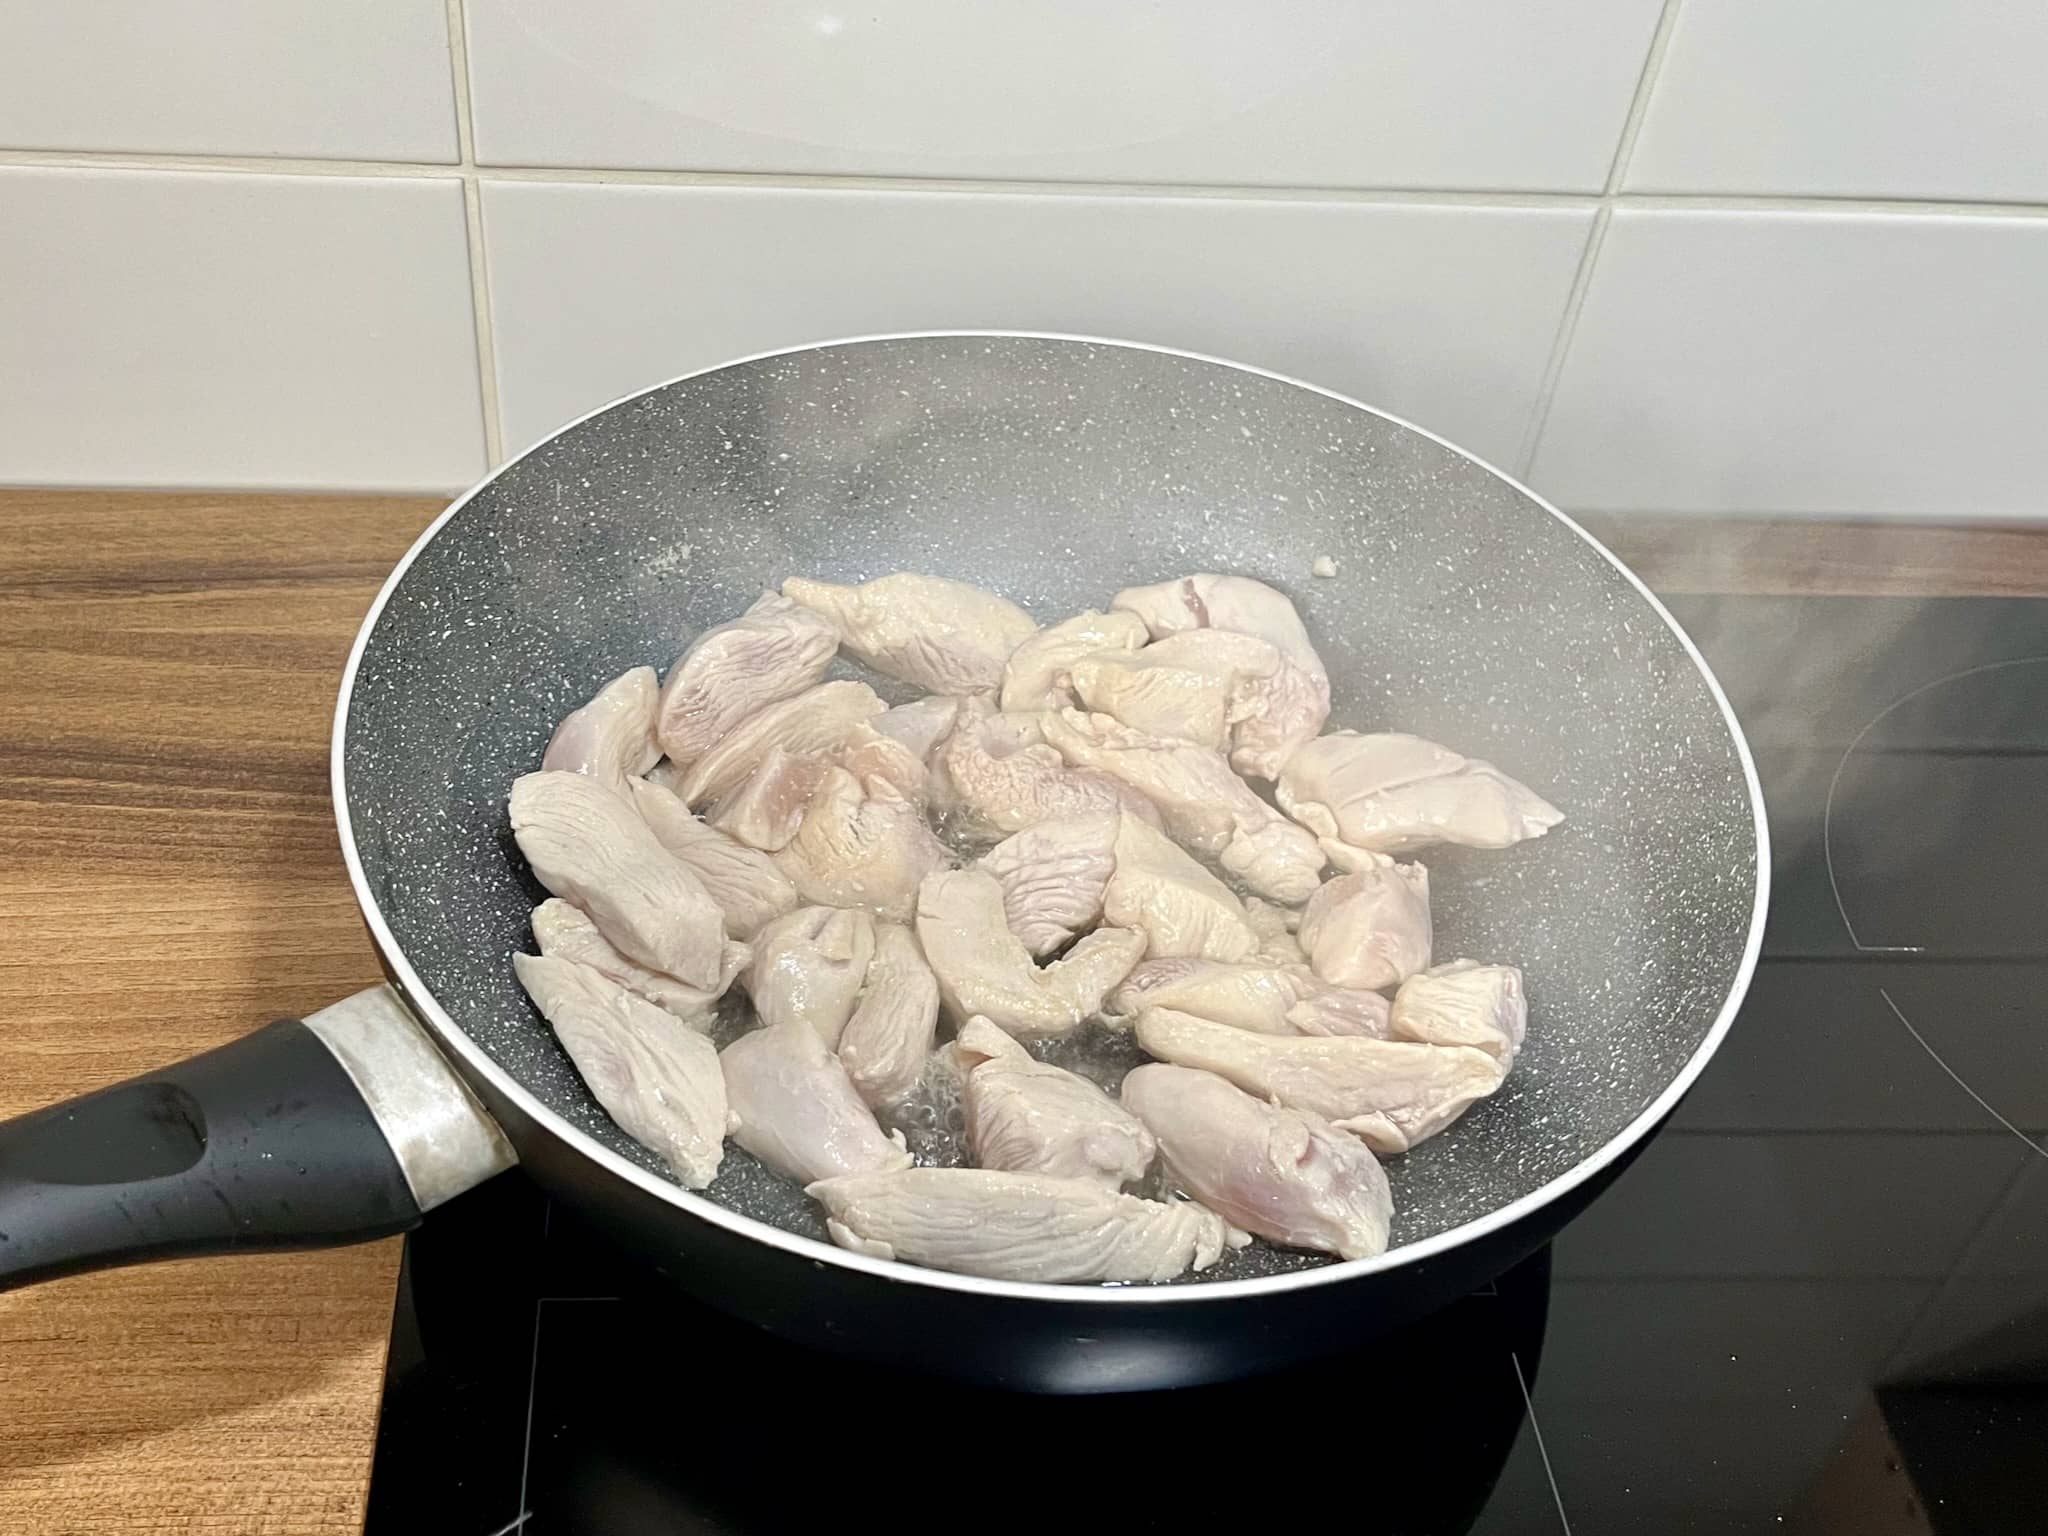 Lightly fried chicken breasts in a pan